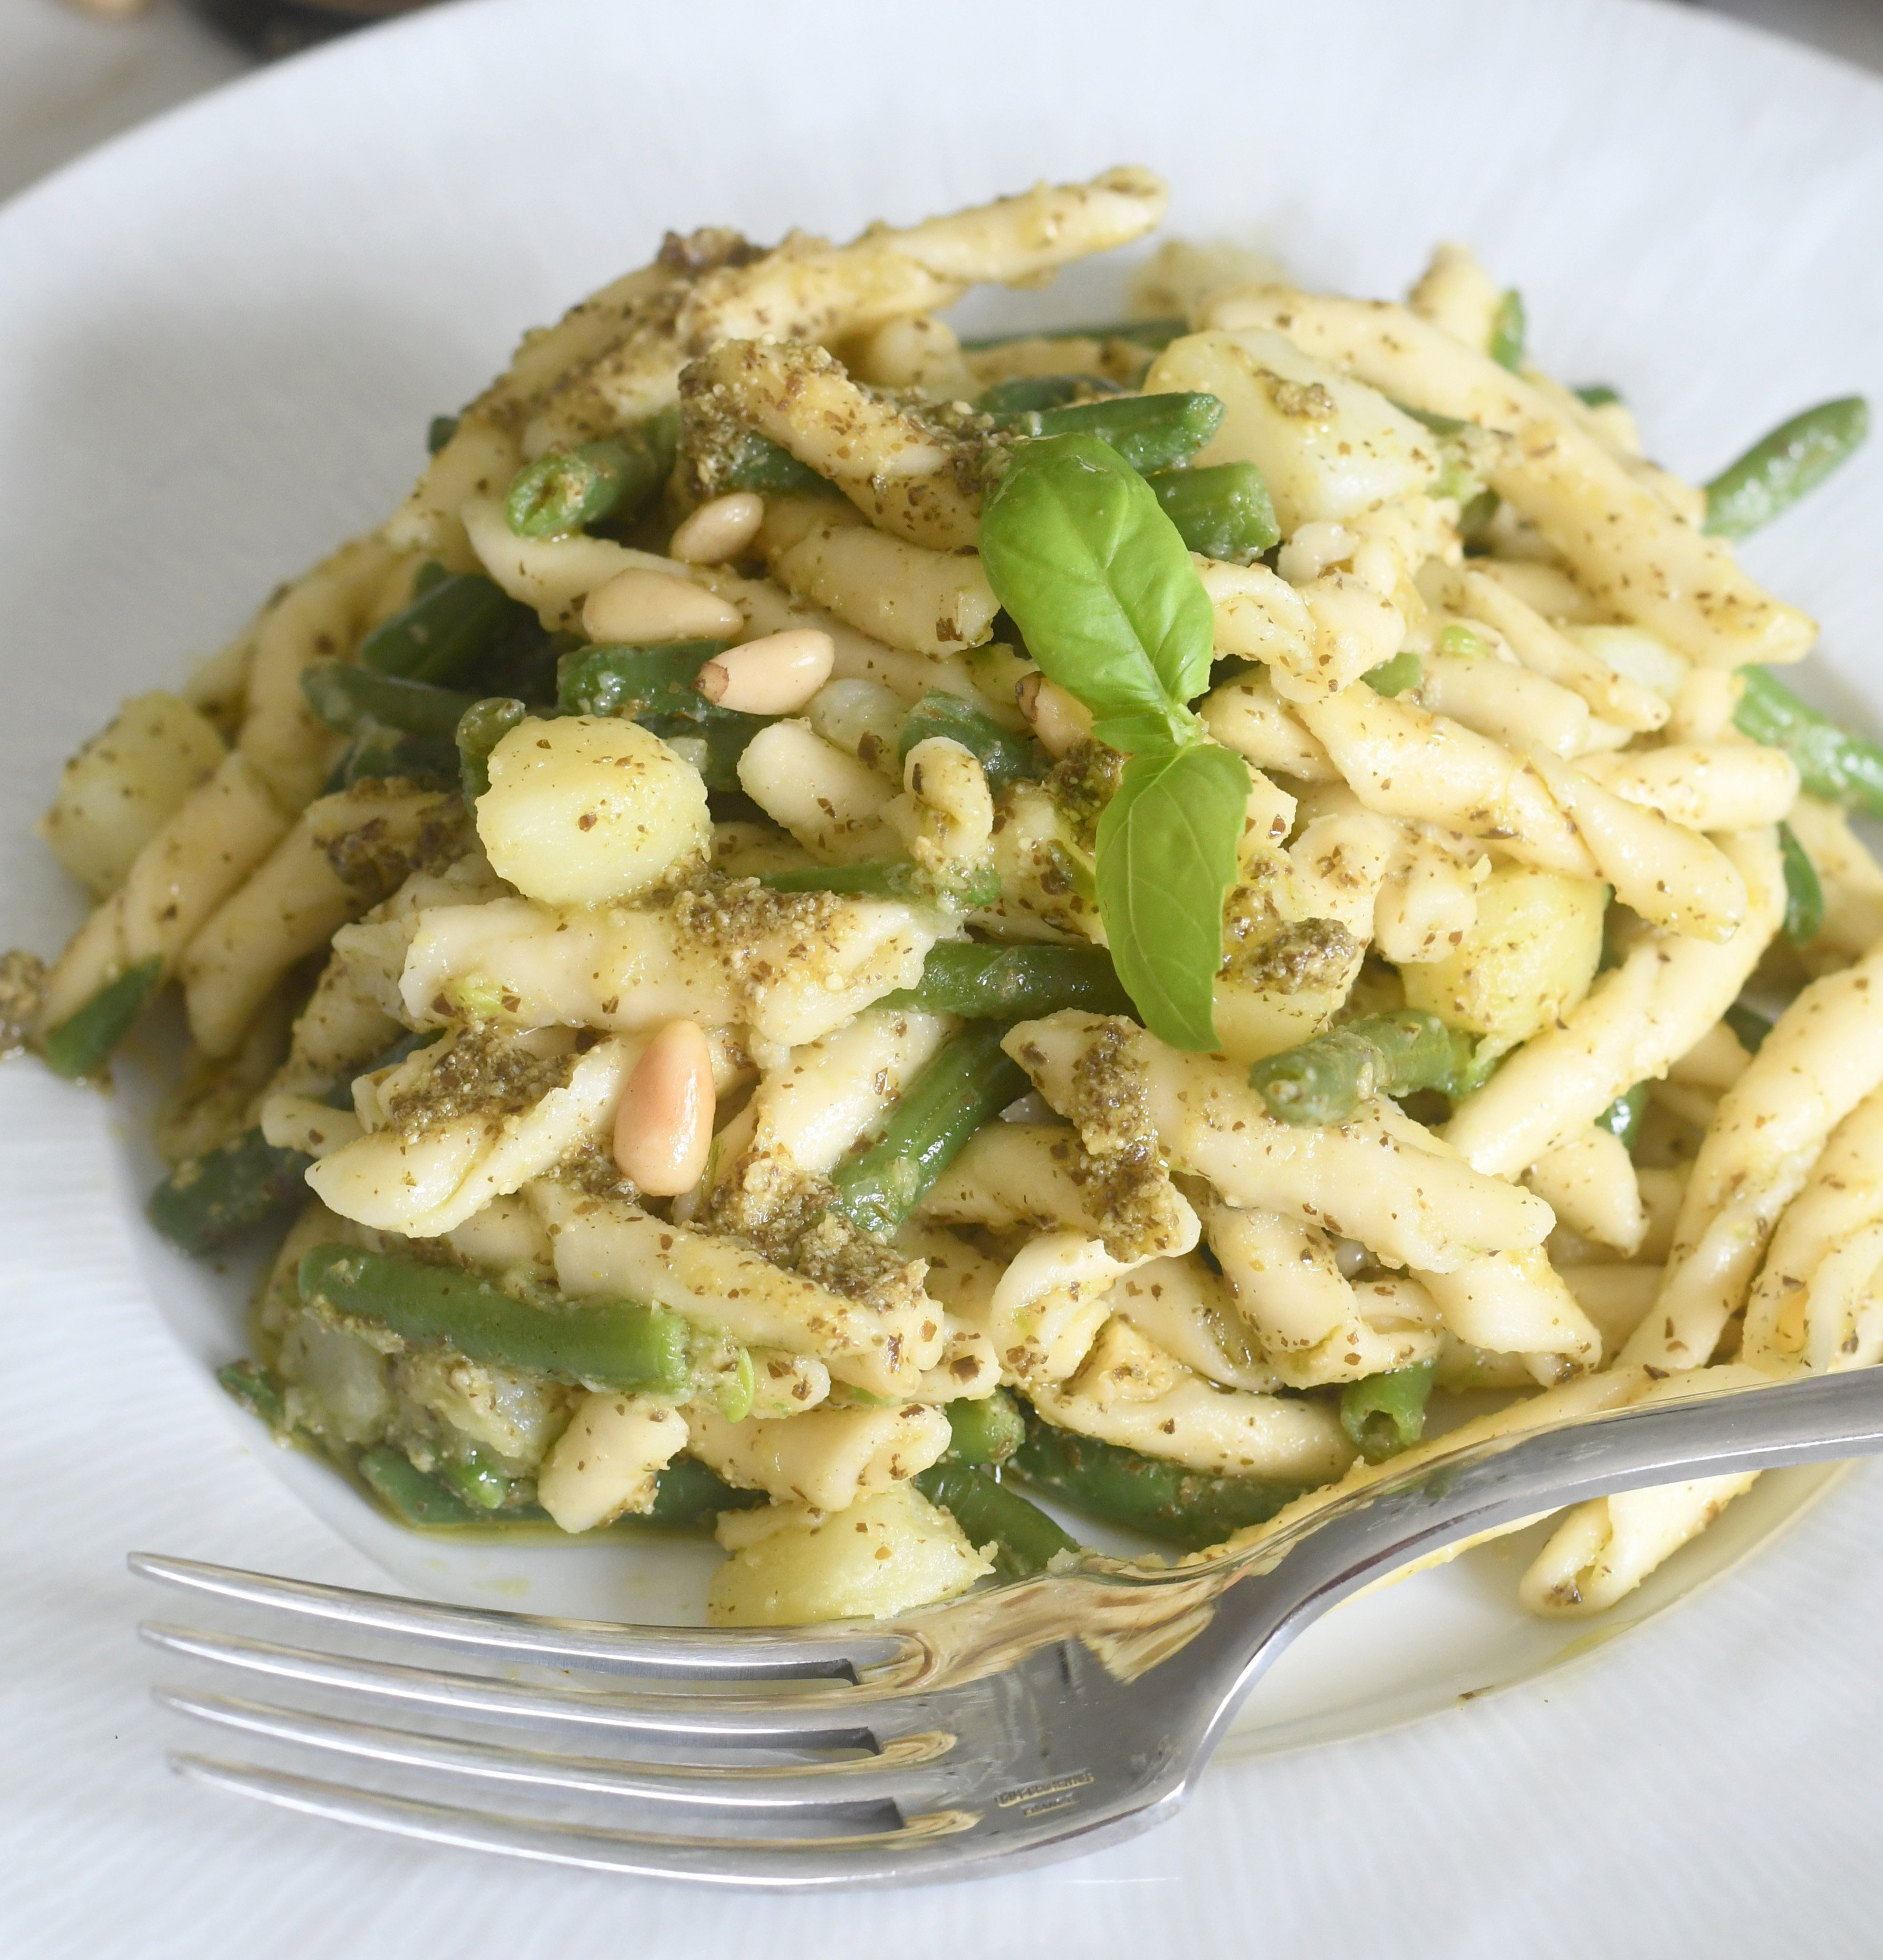 Traditional Ligurian Pasta with Pesto, Potatoes and Green Beans